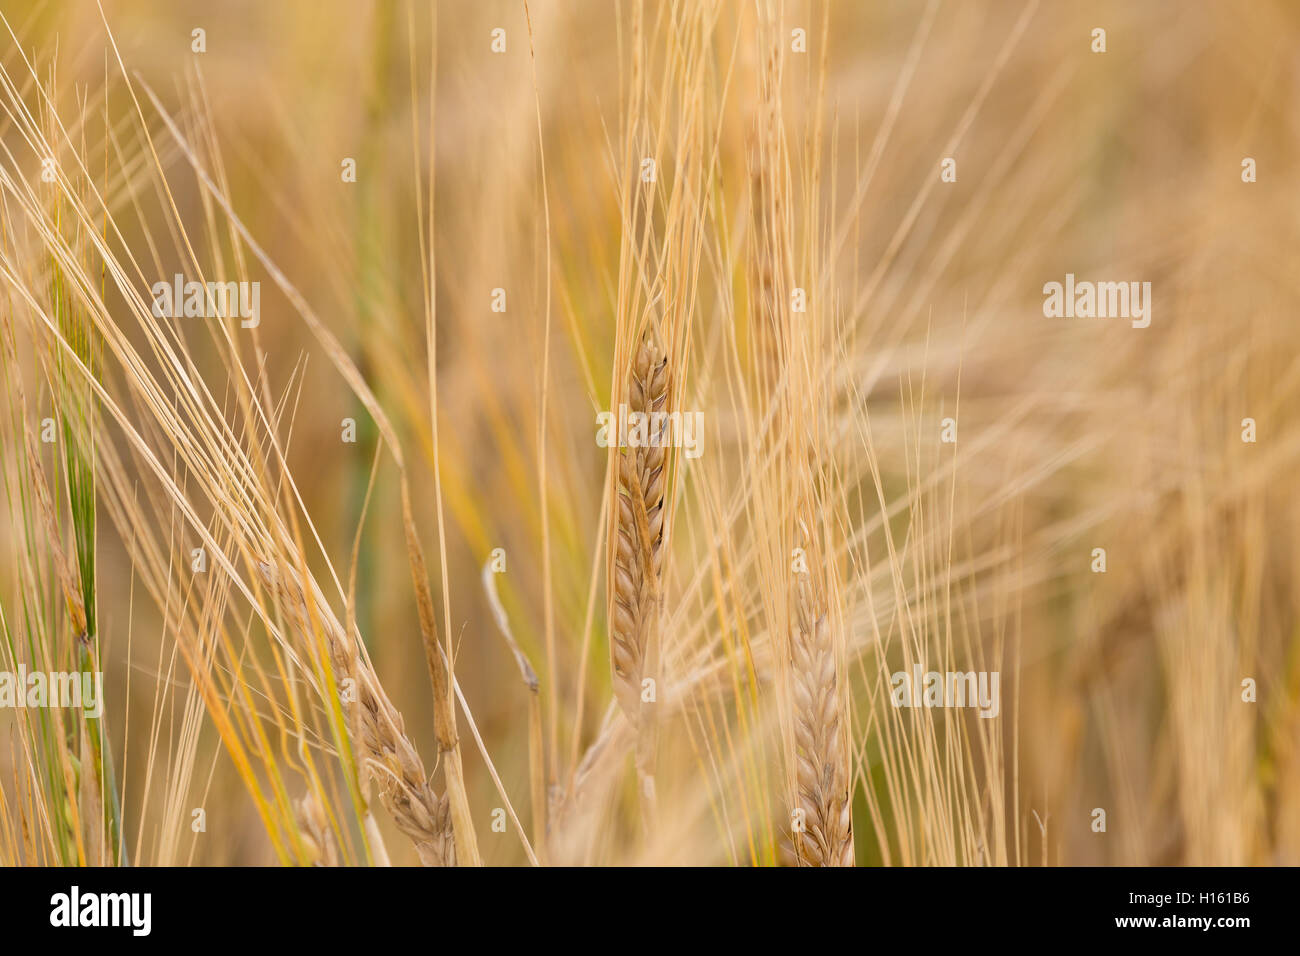 detail of Organic golden summer wheat grains with shallow focus. Summer harvesting concept Stock Photo